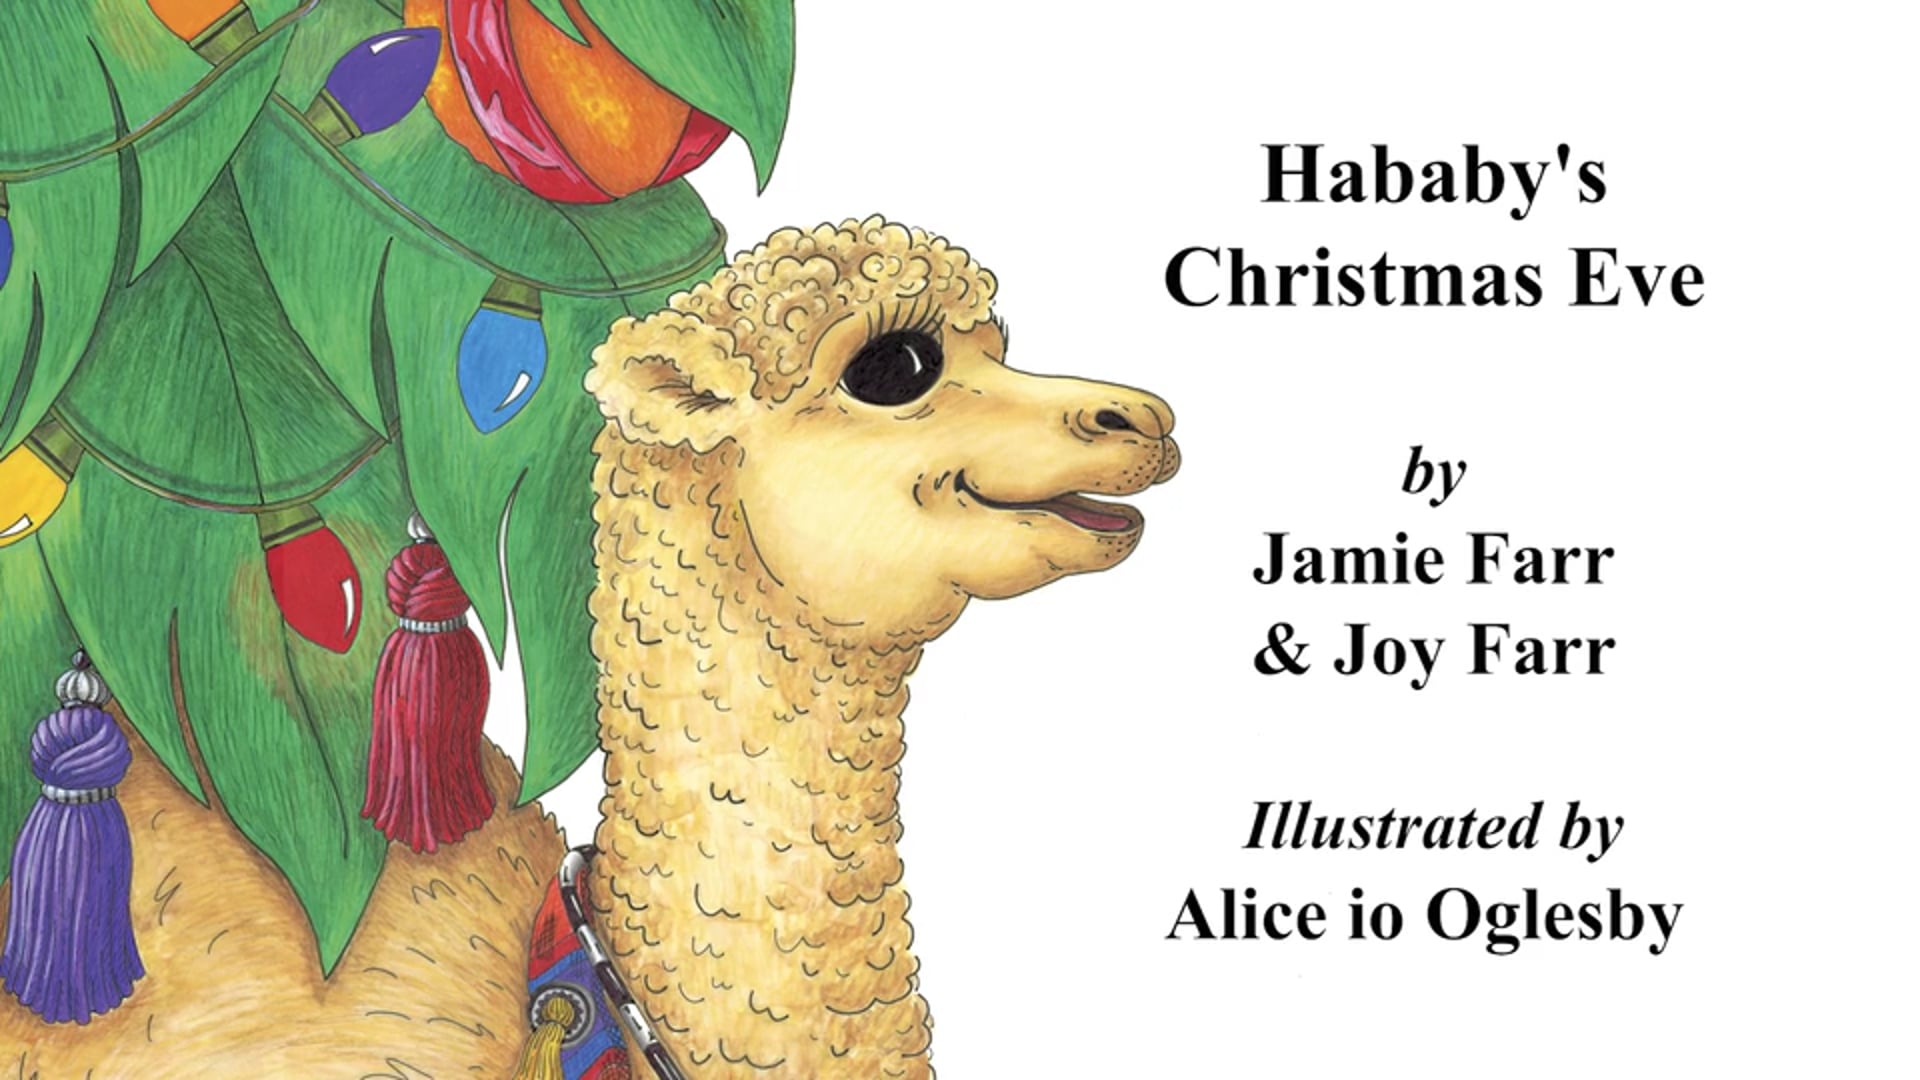 "Hababy's First Christmas" Audiobook Excerpts